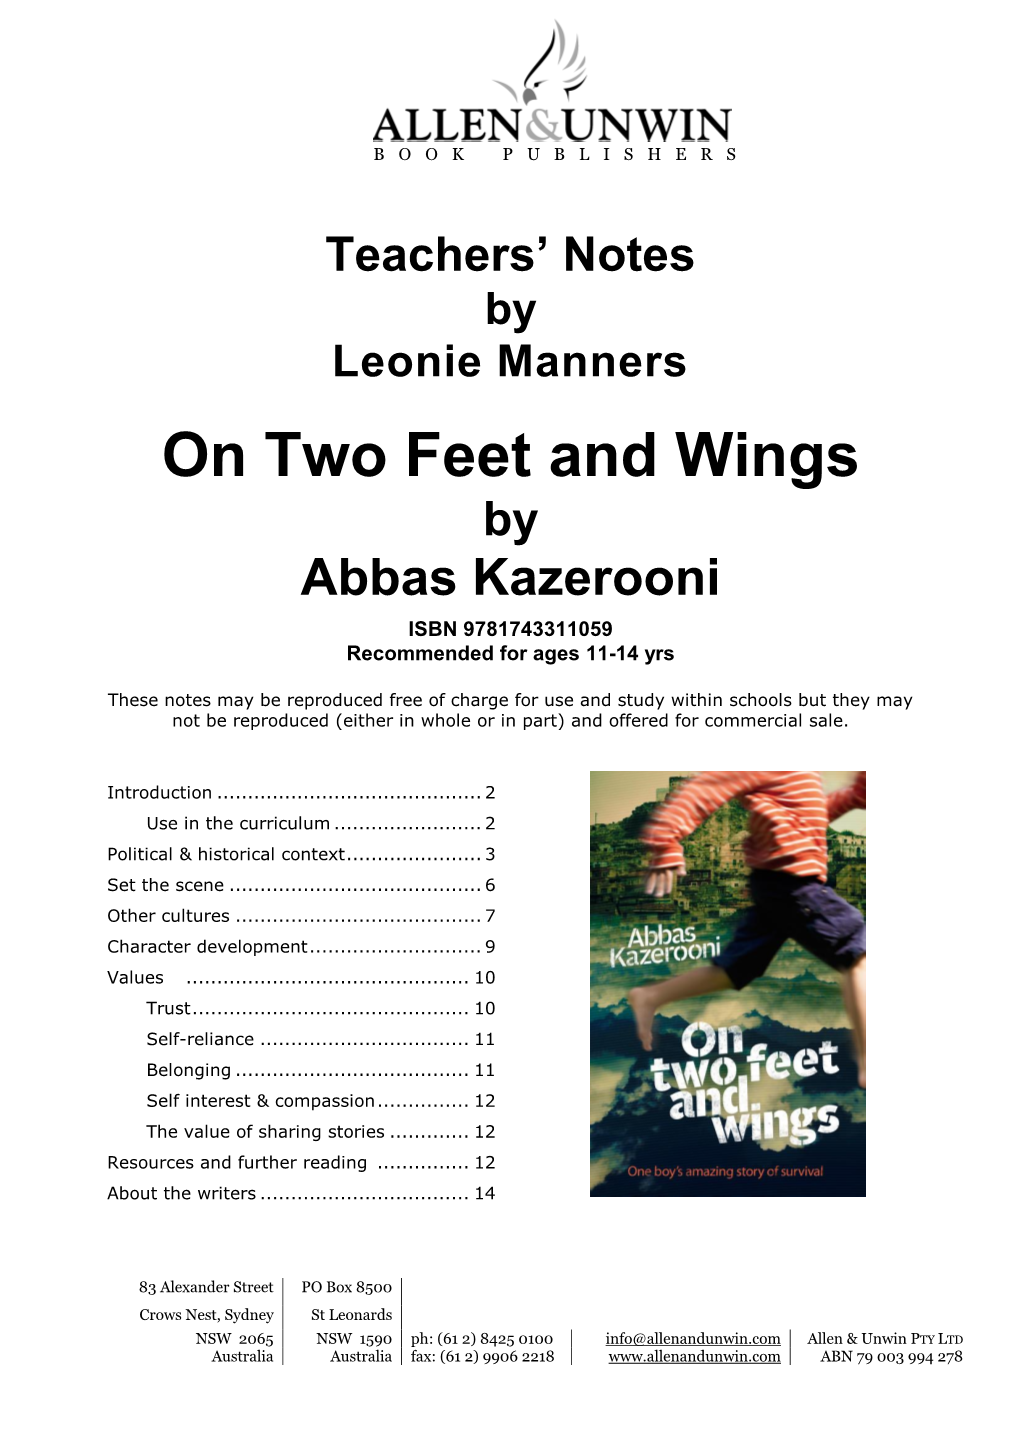 On Two Feet and Wings by Abbas Kazerooni ISBN 9781743311059 Recommended for Ages 11-14 Yrs